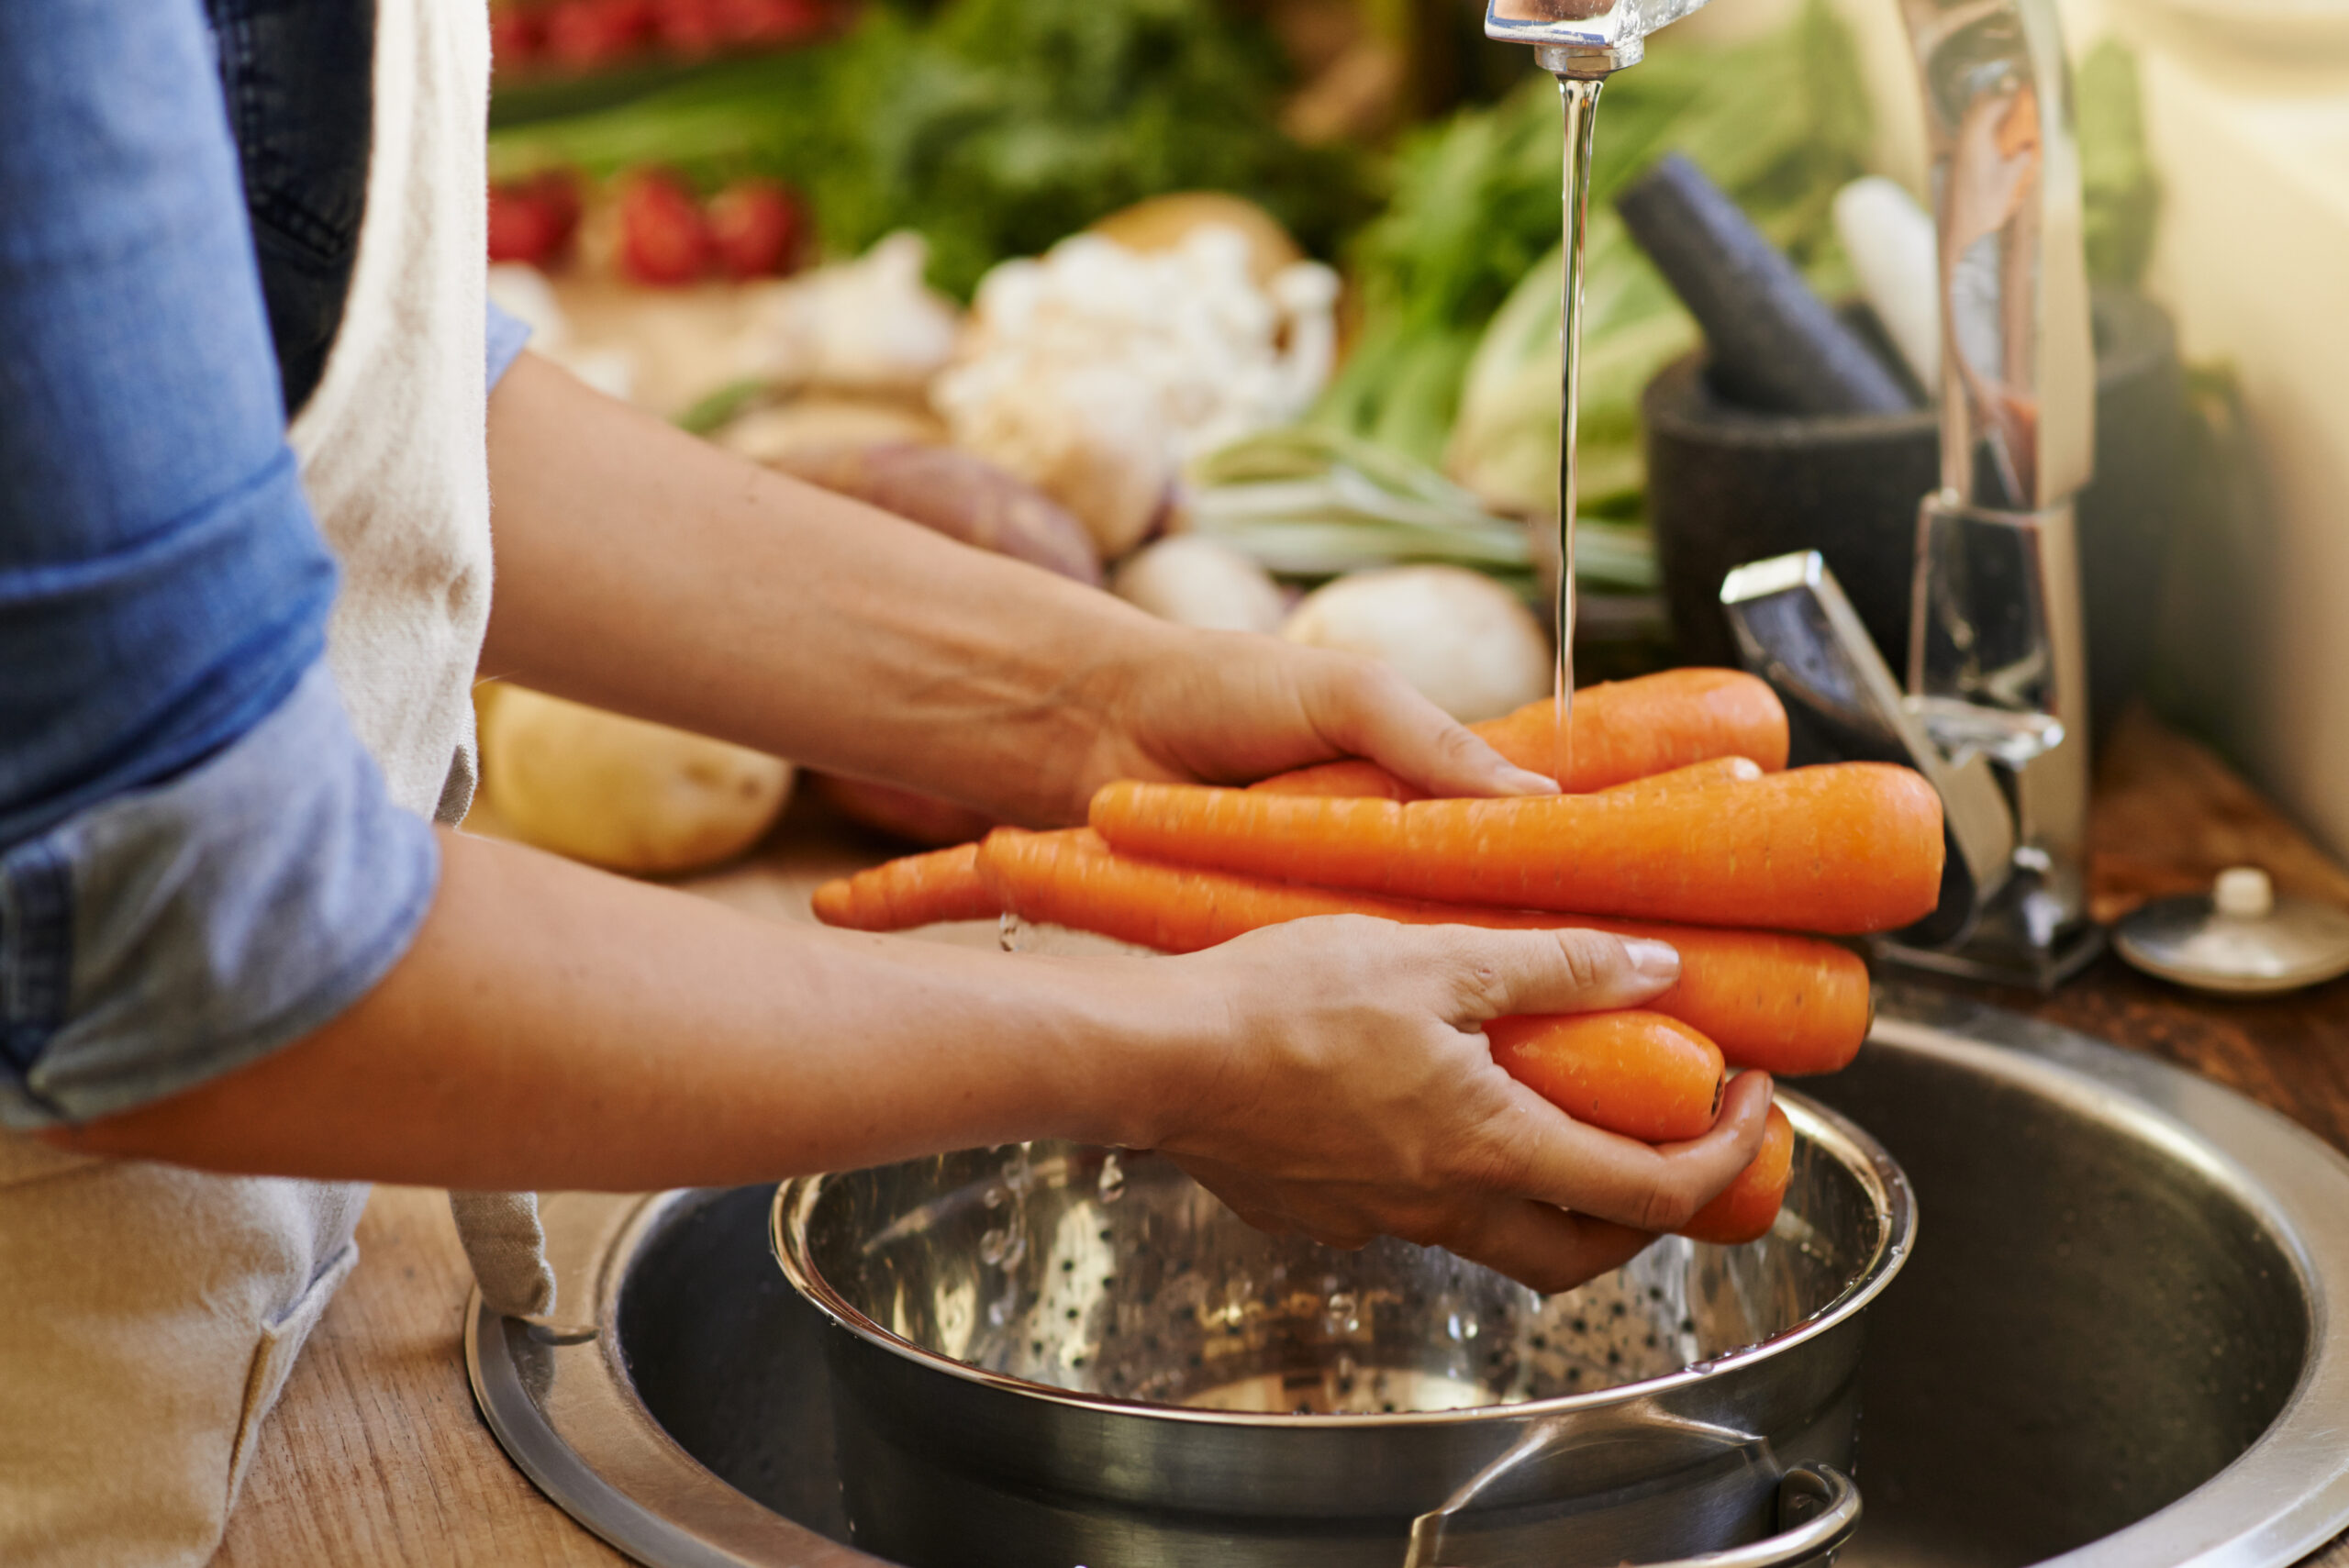 Best Practices for Maintaining Food Hygiene in Food Preparation and Handling